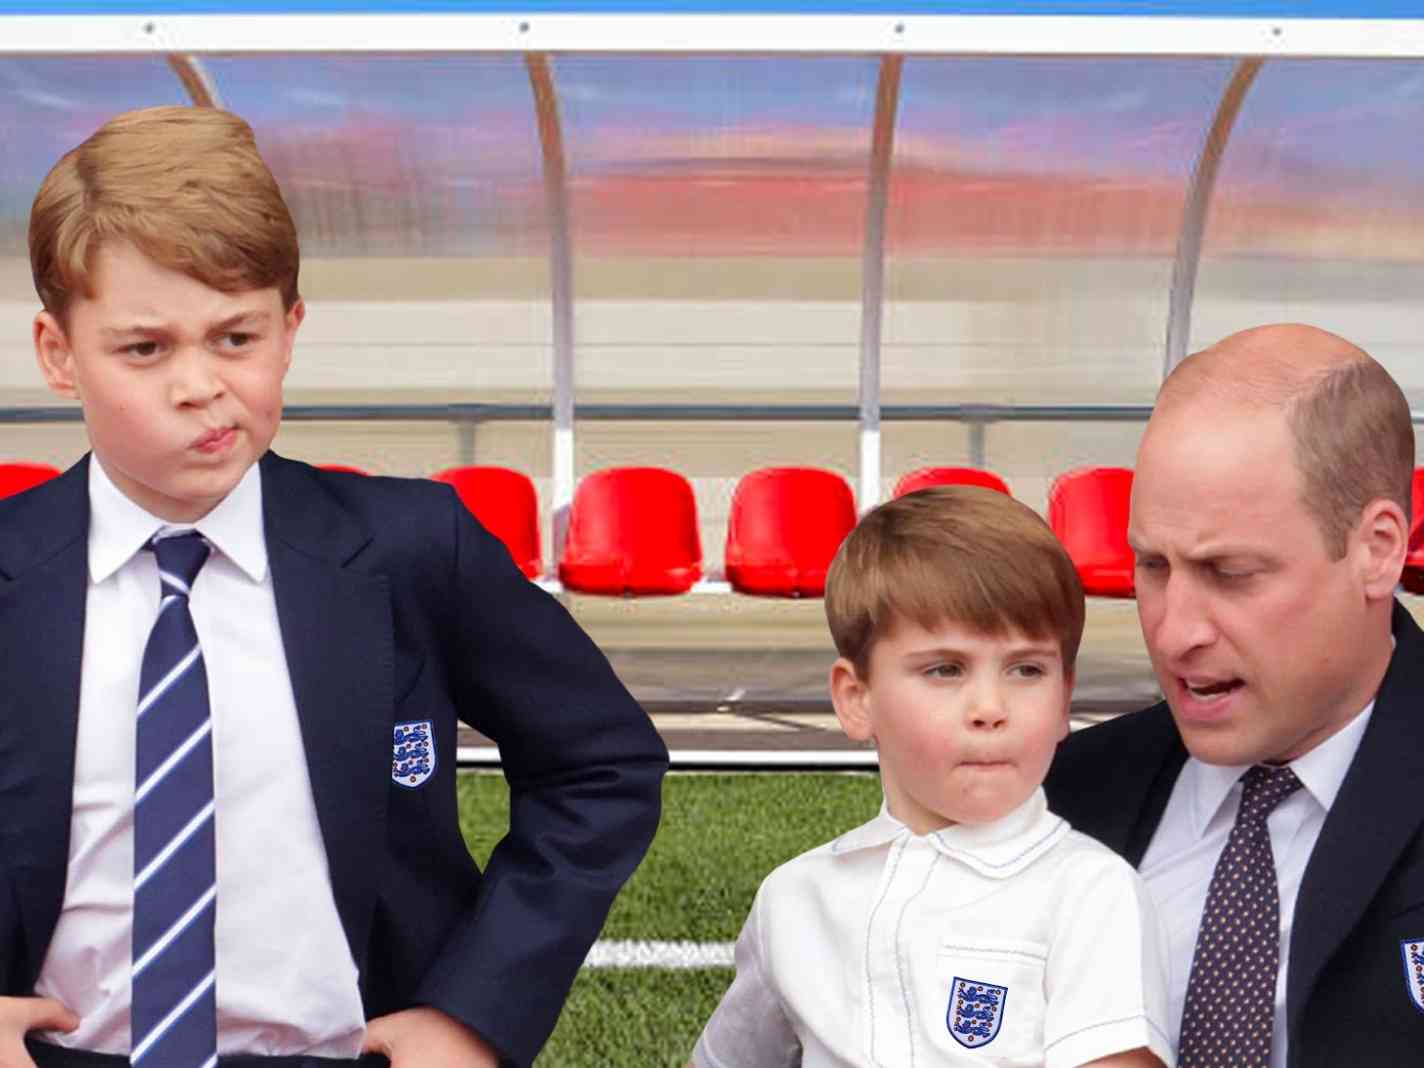 Royal Family photo featuring Prince George and Prince Louis gets Football Twitter talking